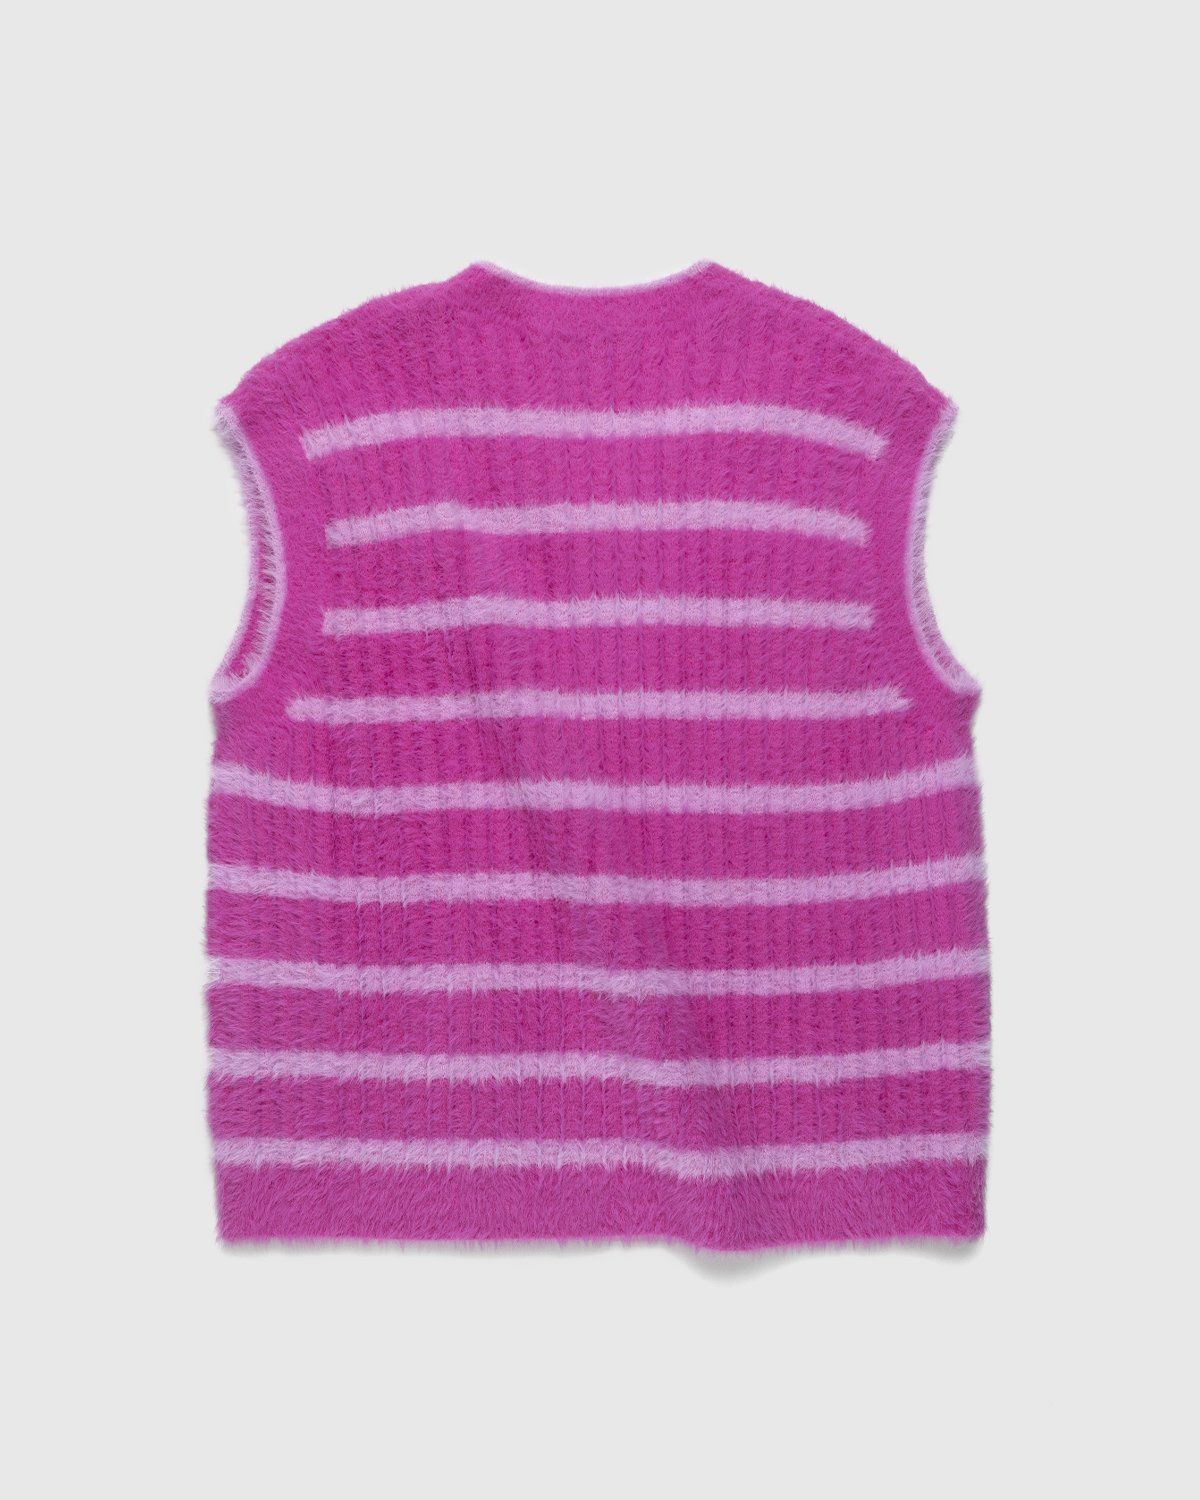 JACQUEMUS – Le Gilet Neve Multi-Pink - Knitwear - Pink - Image 2